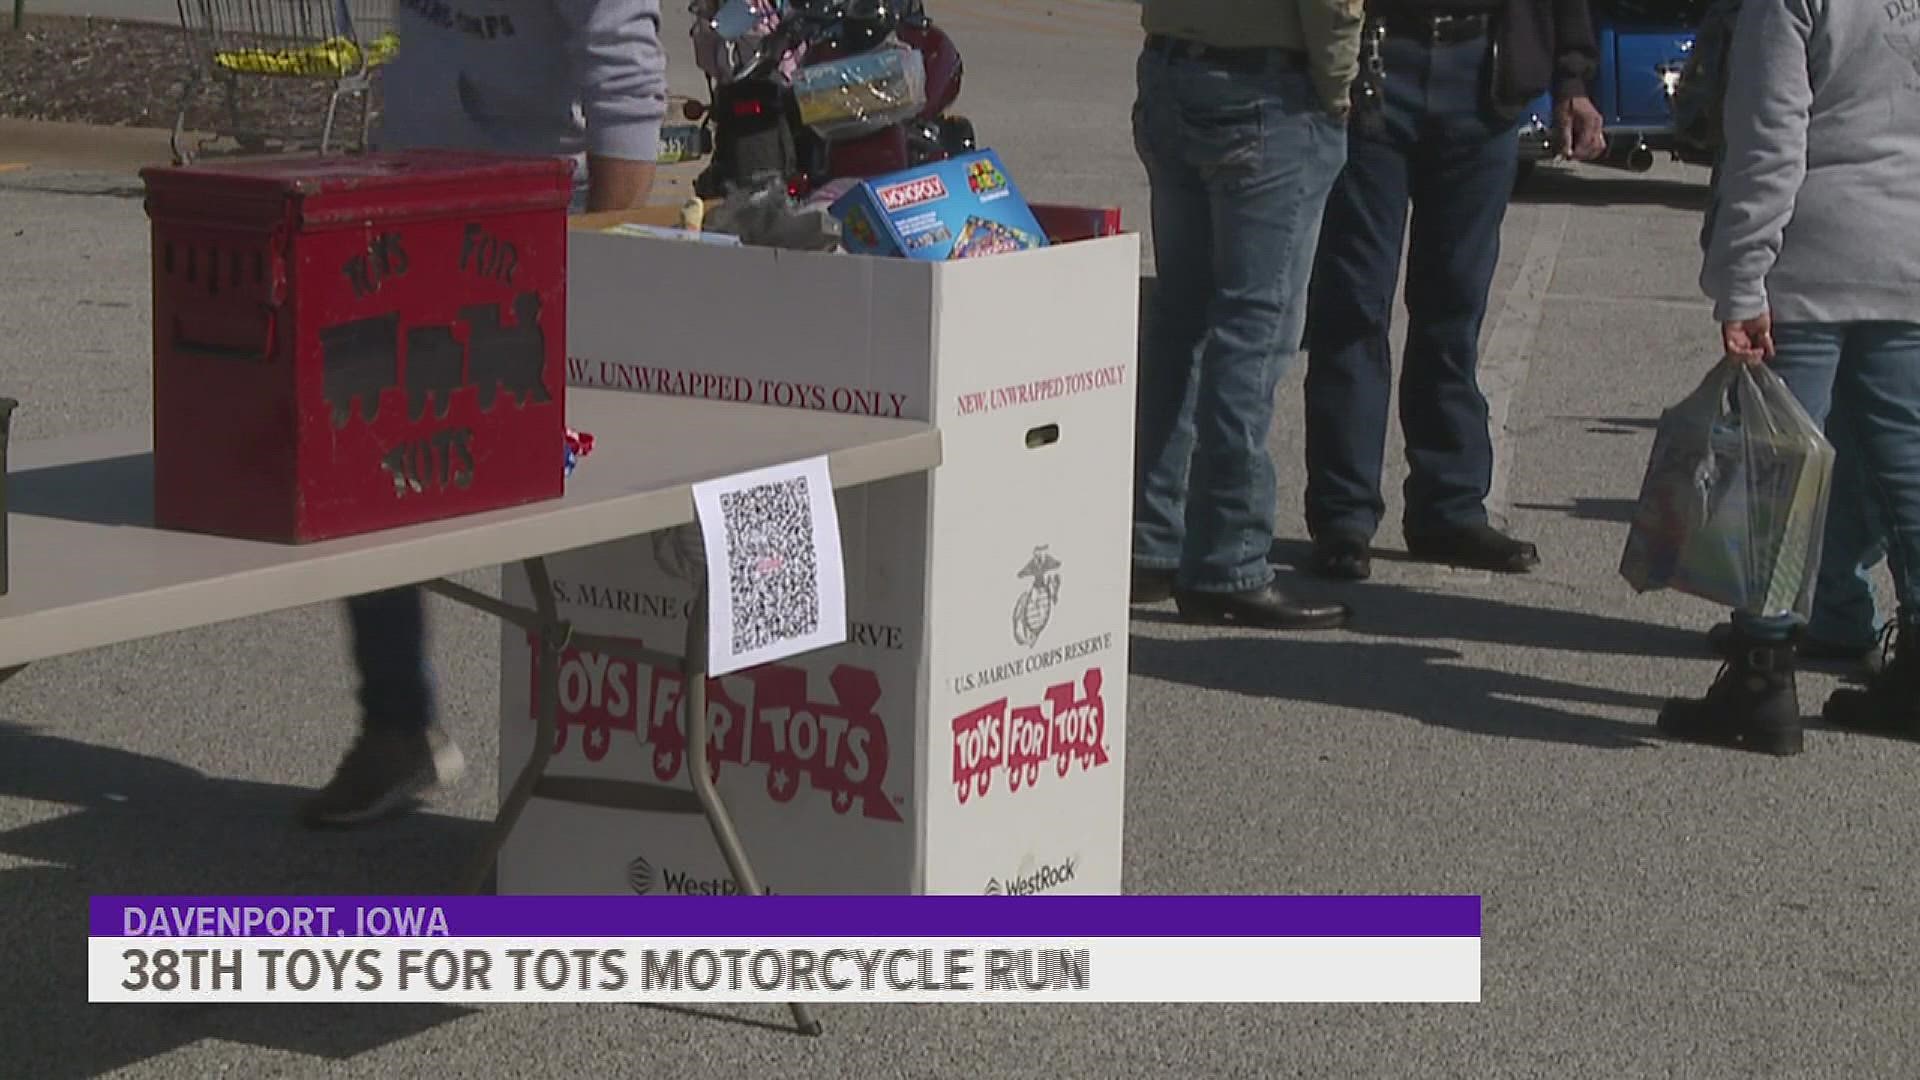 A quad cities non-profit organization hit the roads today for their 38th annual Toys for Tots Motorcycle Run.